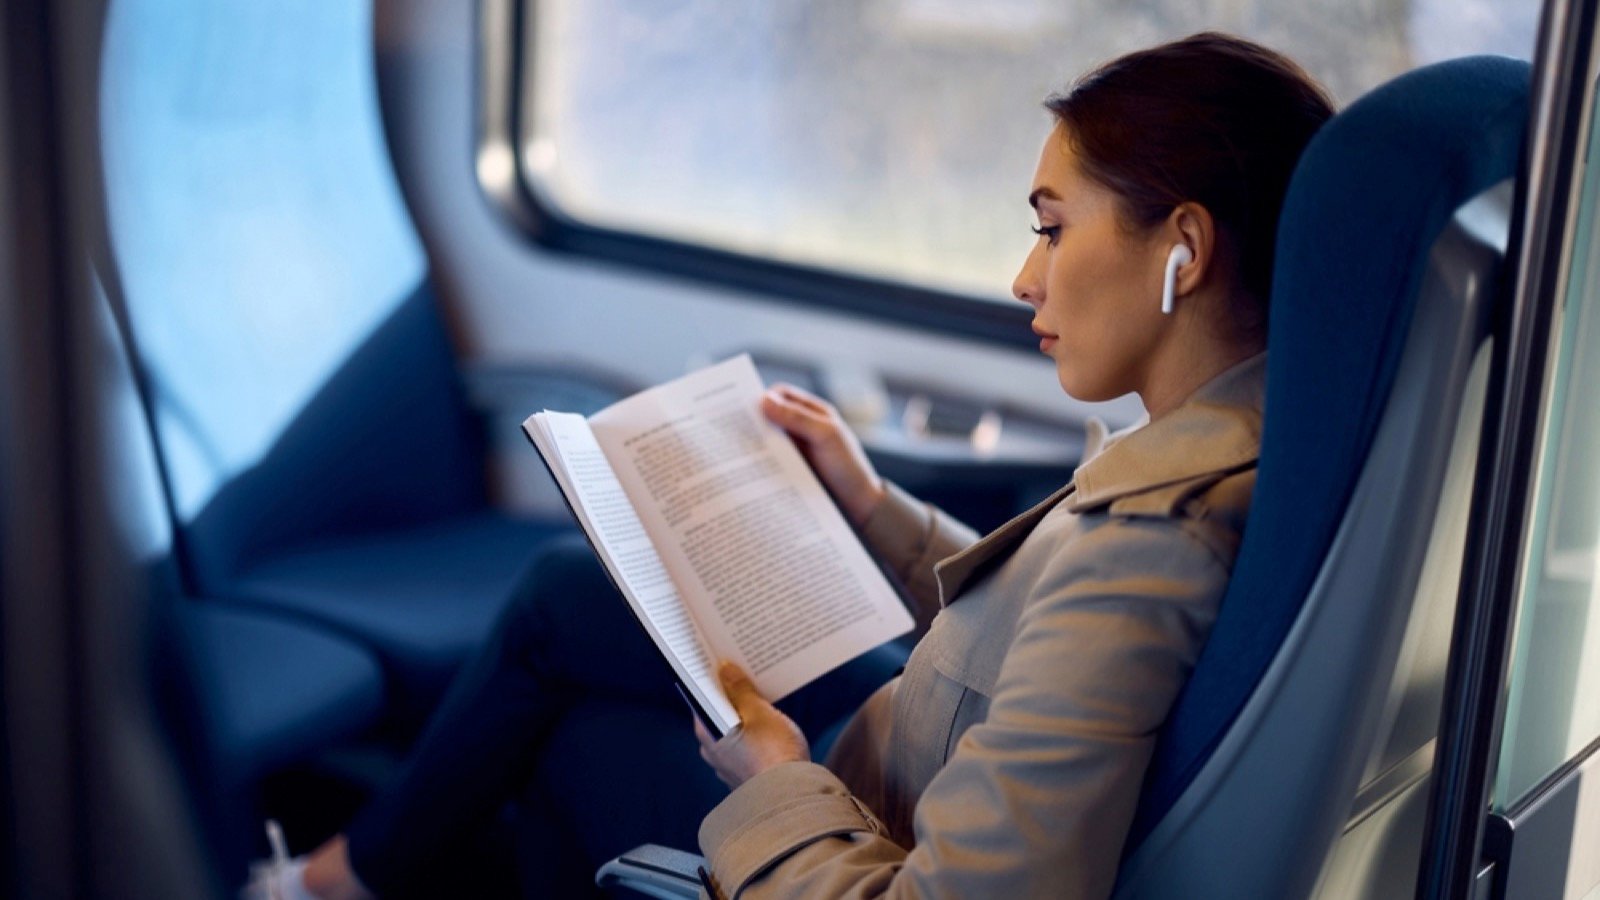 <p>If you can afford them, investing in a quality pair of headphones will make commuting using public transit much more pleasant. Figure out what works for you: are you an over-the-ear or earbud type of person? Even if you <a href="https://www.kindafrugal.com/11-tips-to-stop-living-a-lifestyle-you-cant-afford/">can’t afford</a> to spend much, find a comfortable pair with good sound so you can enjoy your commute.</p>